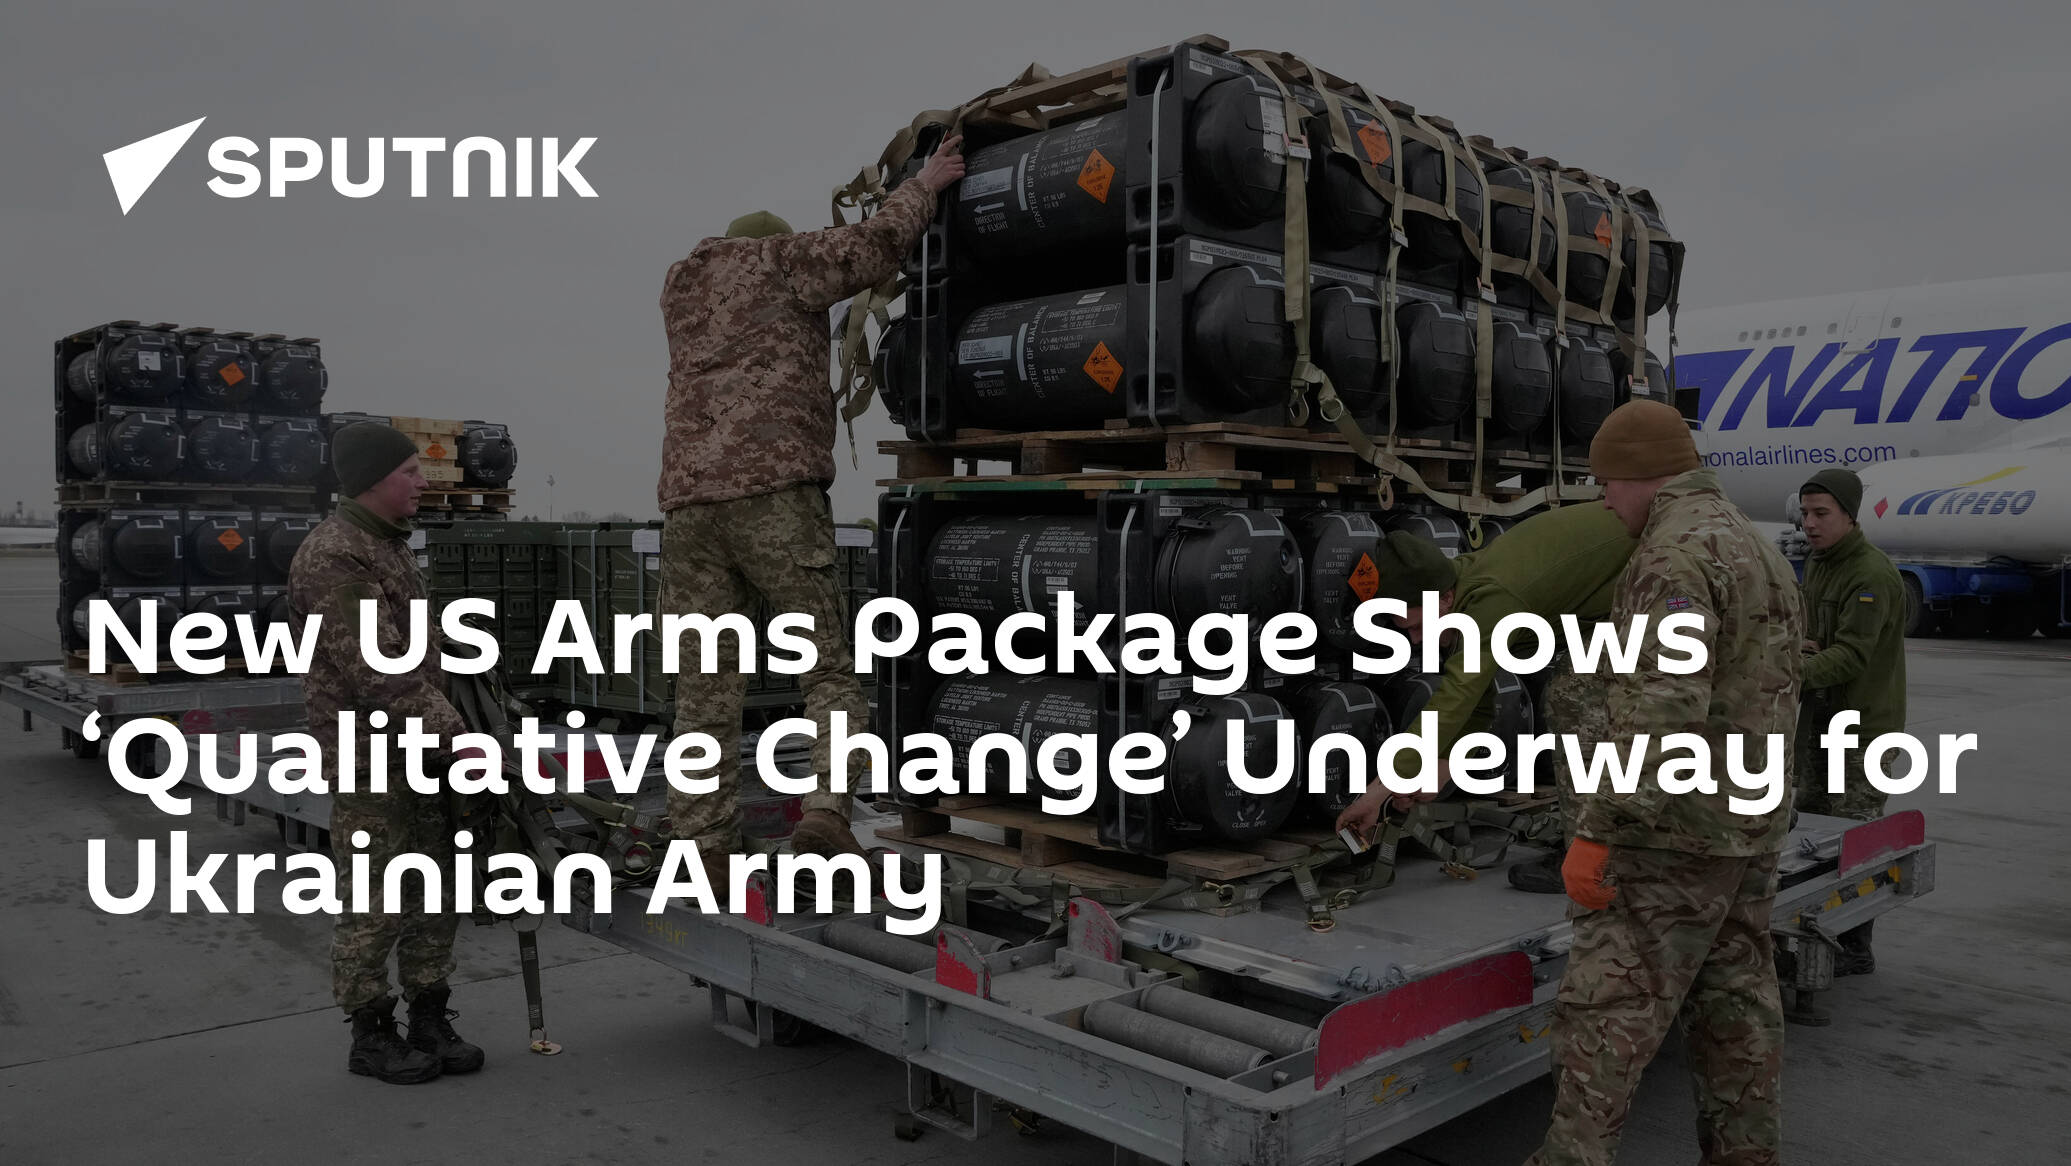 New US Arms Package Shows ‘Qualitative Change’ Underway for Ukrainian Army